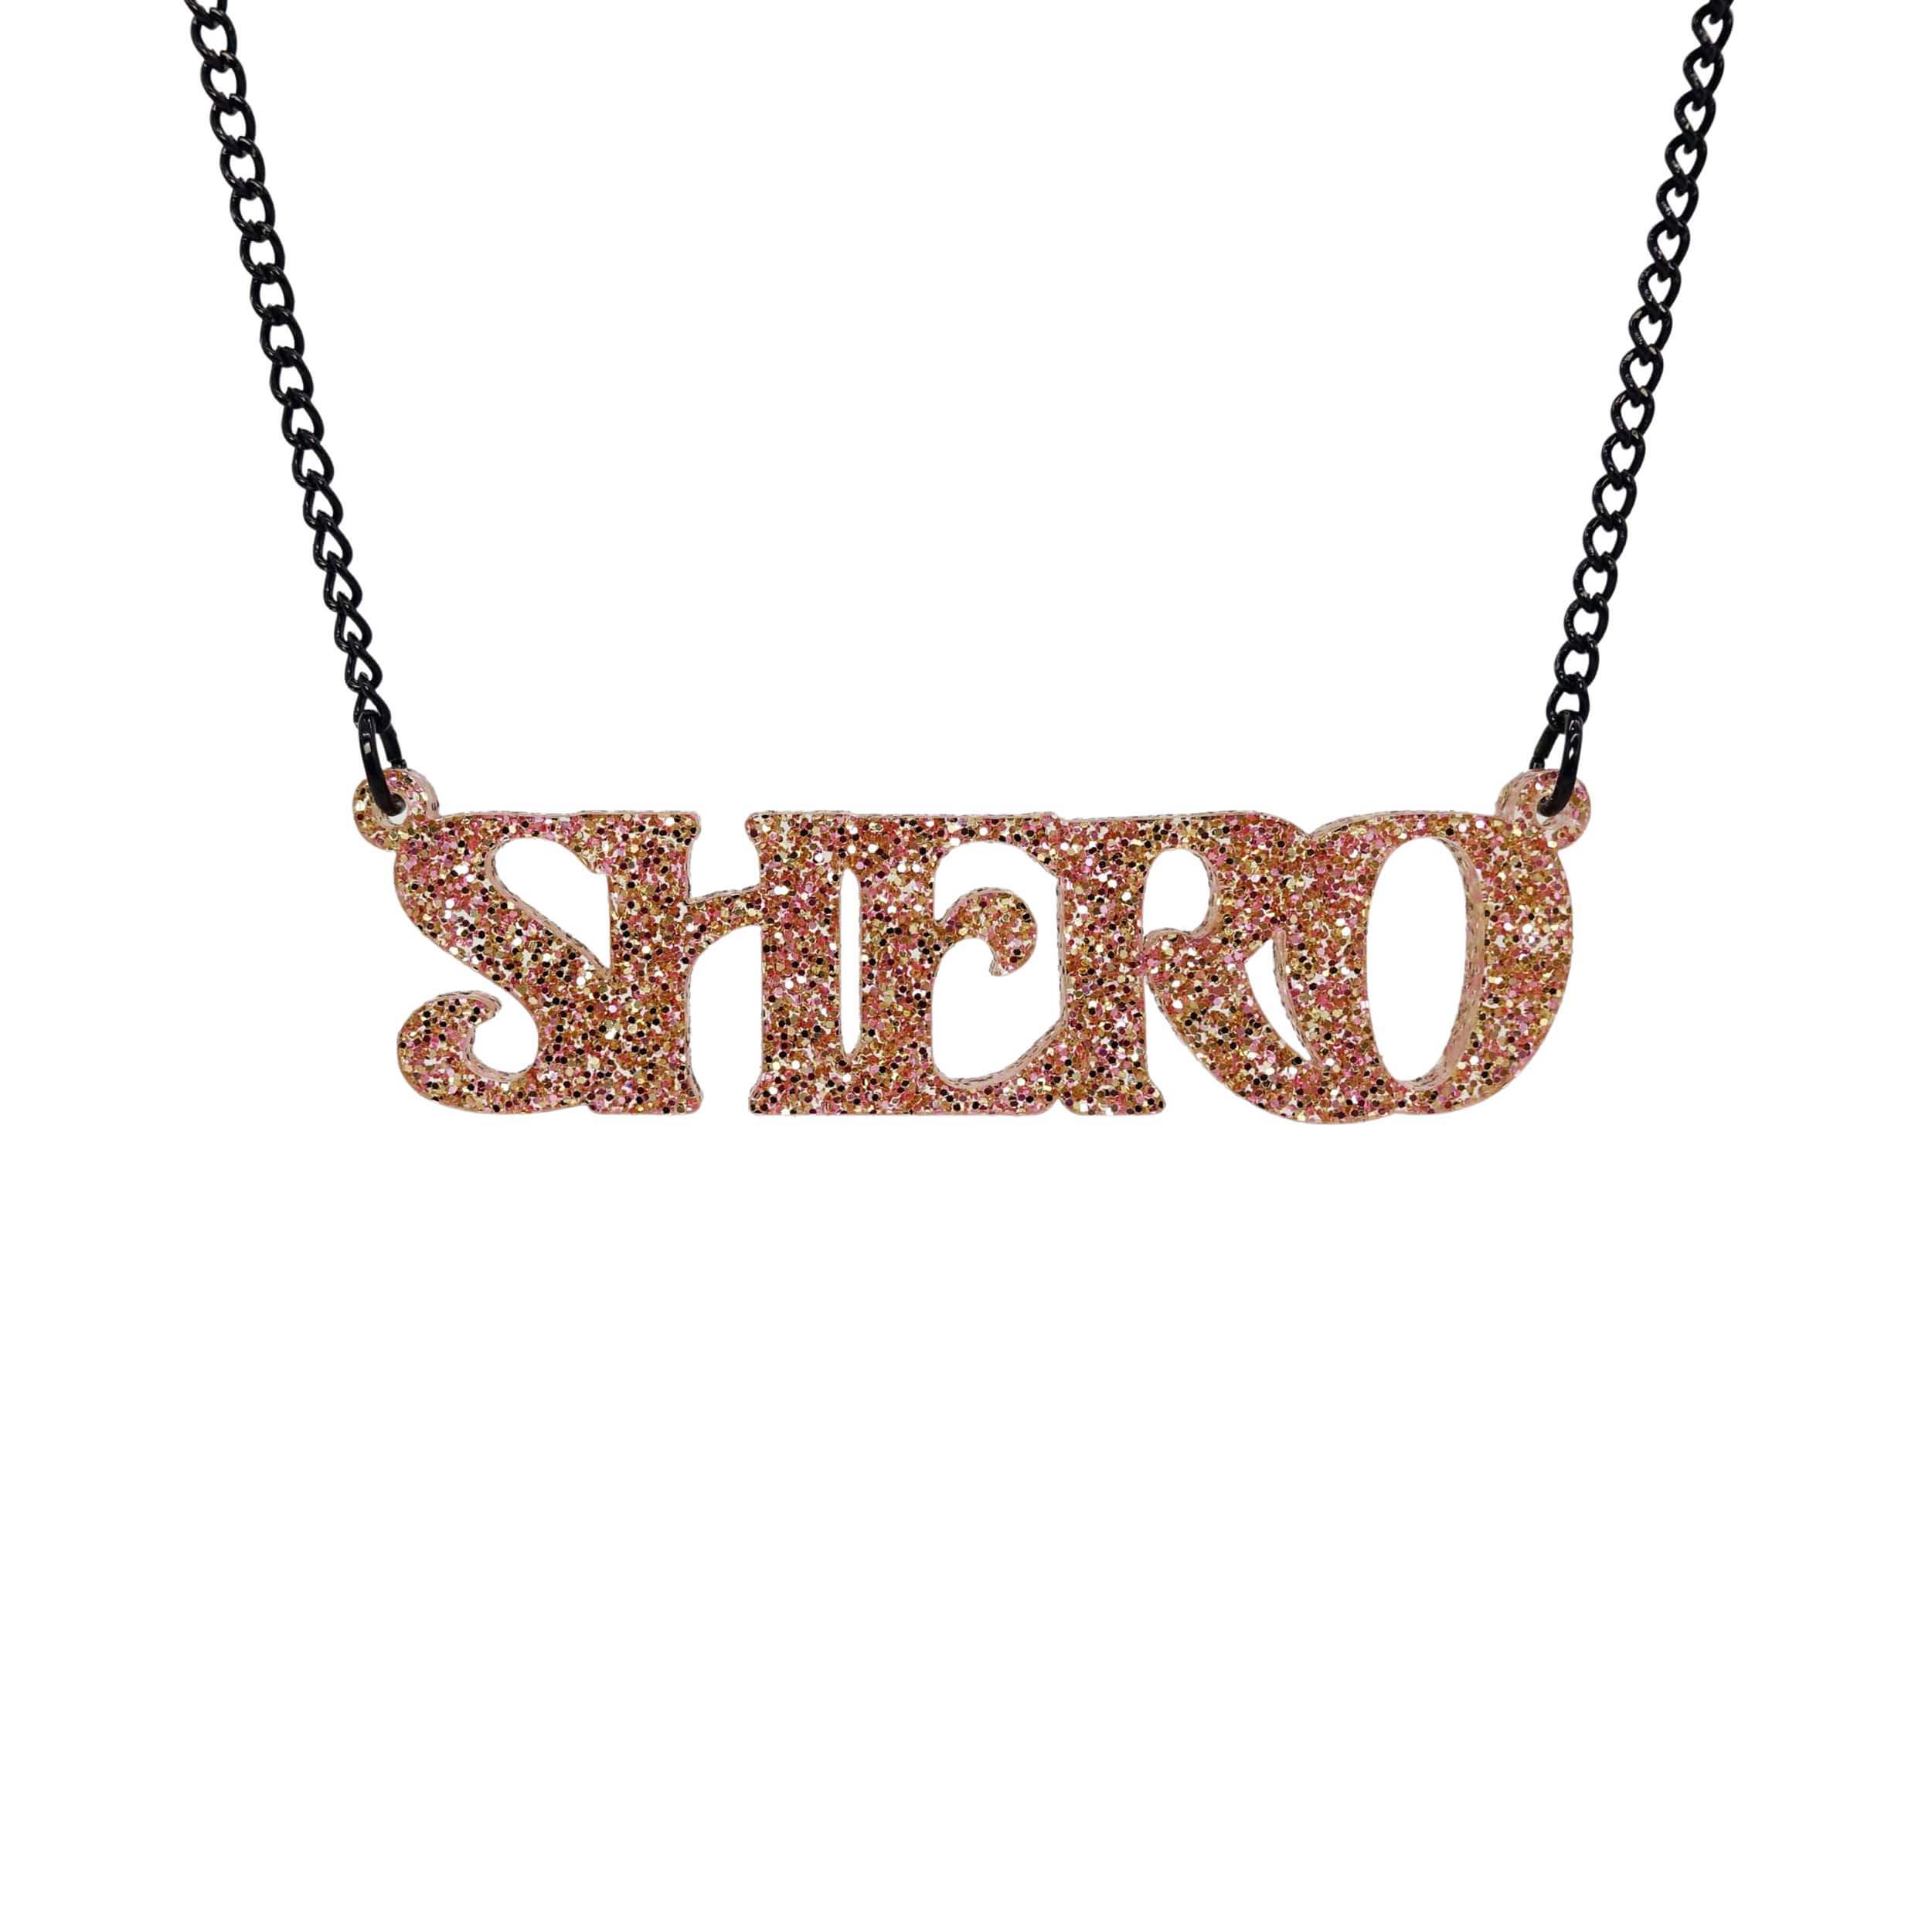 Shero necklace in pink fizz glitter. It's a heroine's journey and you are the main character! 